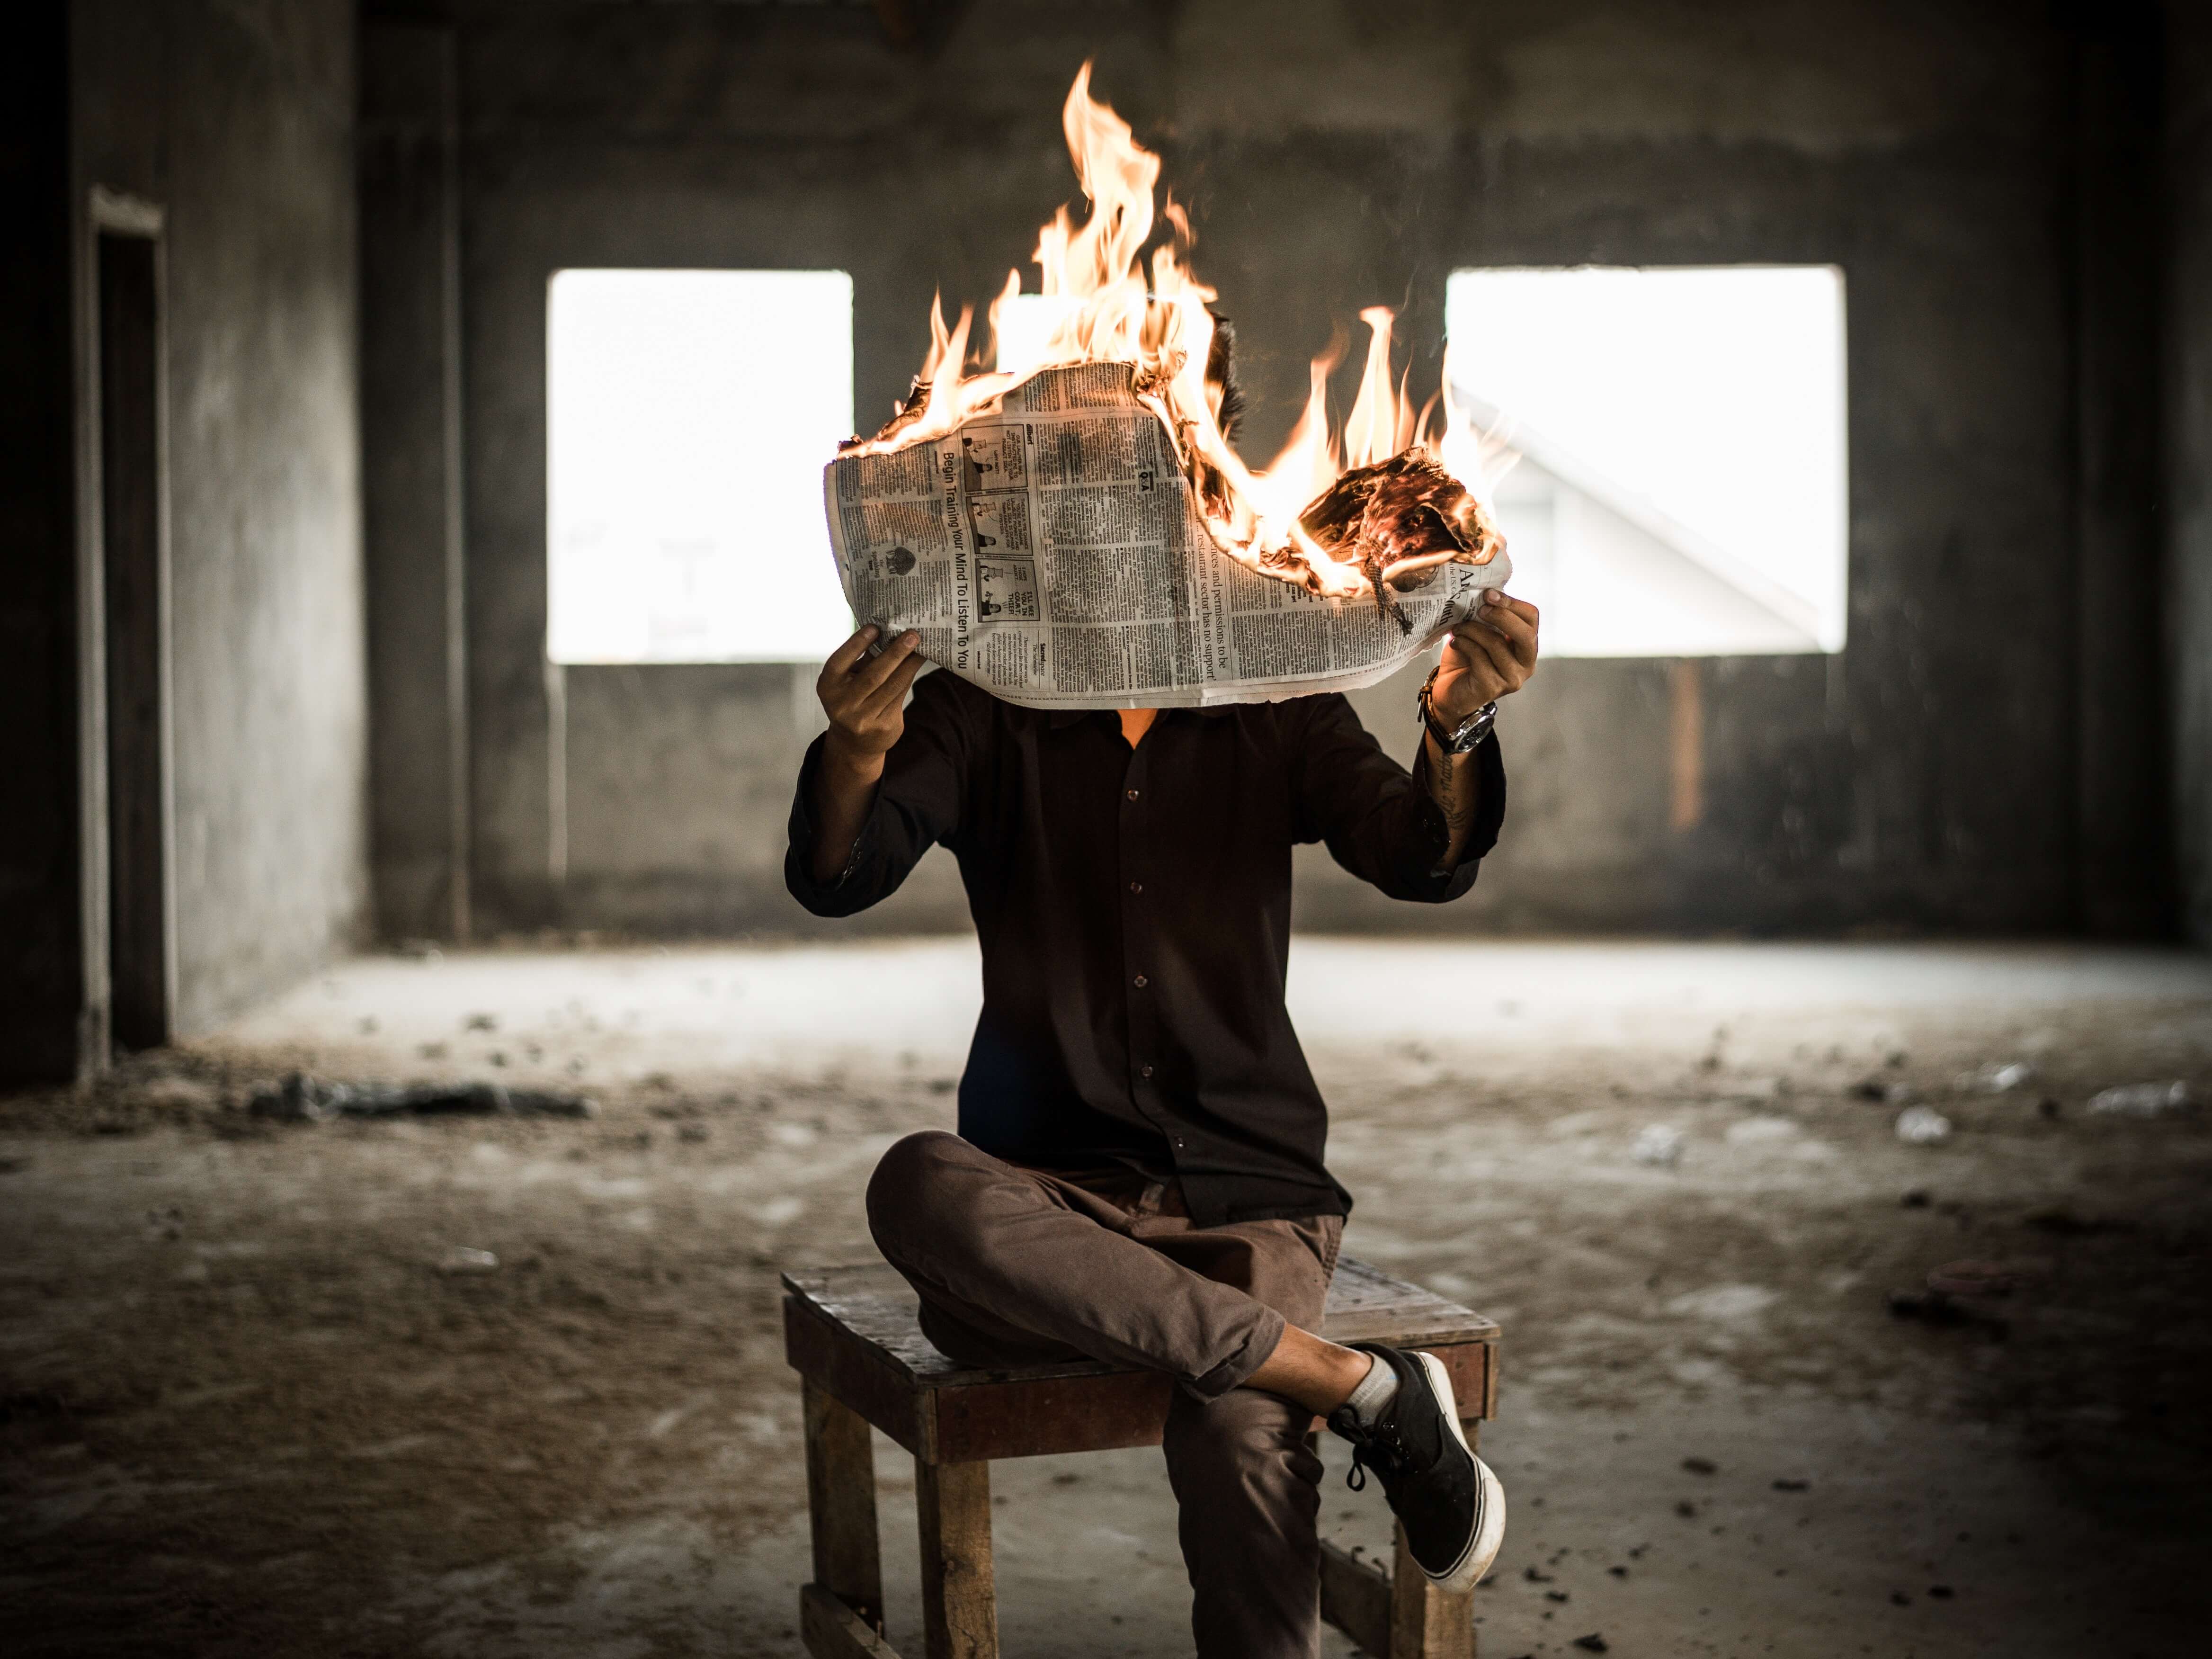 Man sitting on chair, holding newspaper on fire